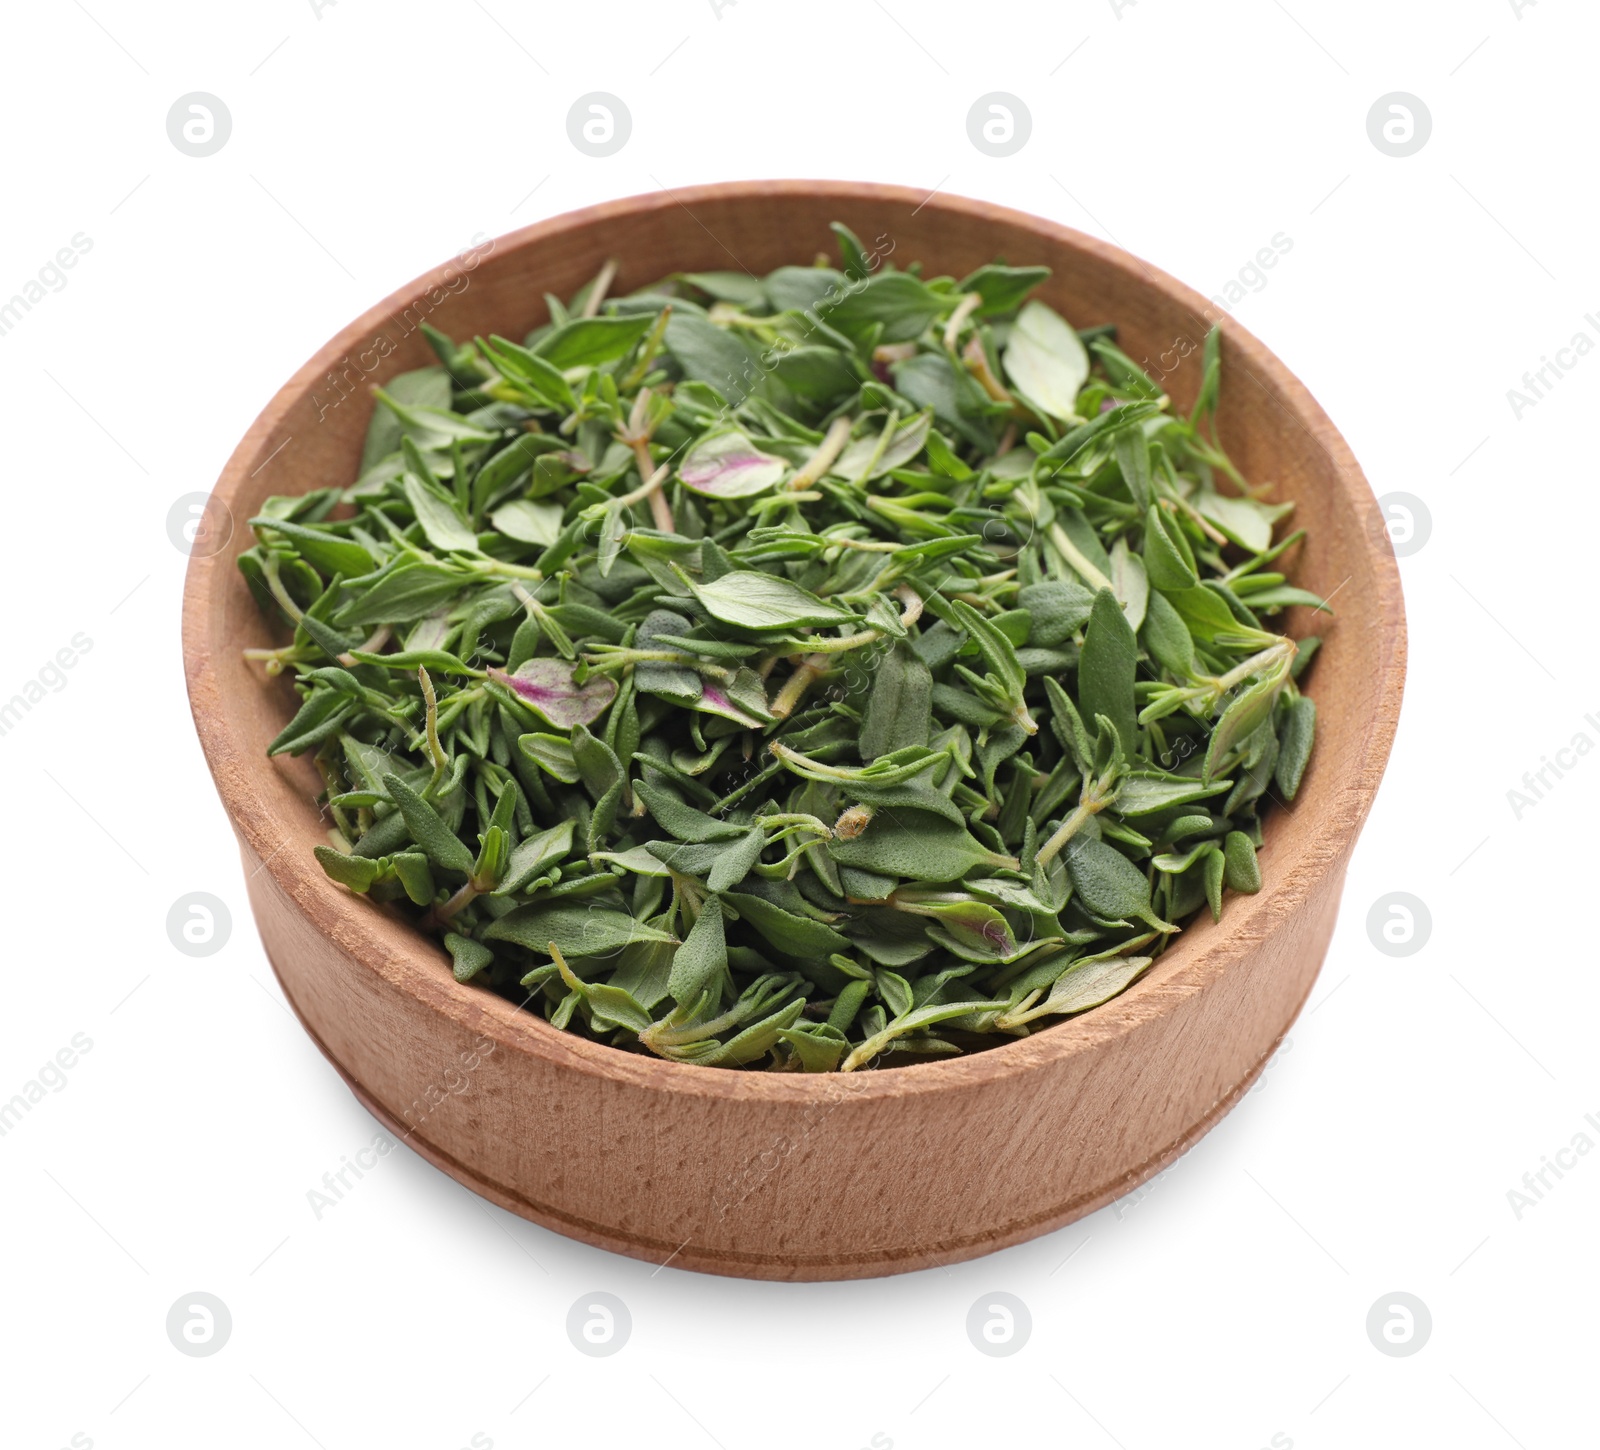 Photo of Wooden bowl of fresh green thyme leaves on white background